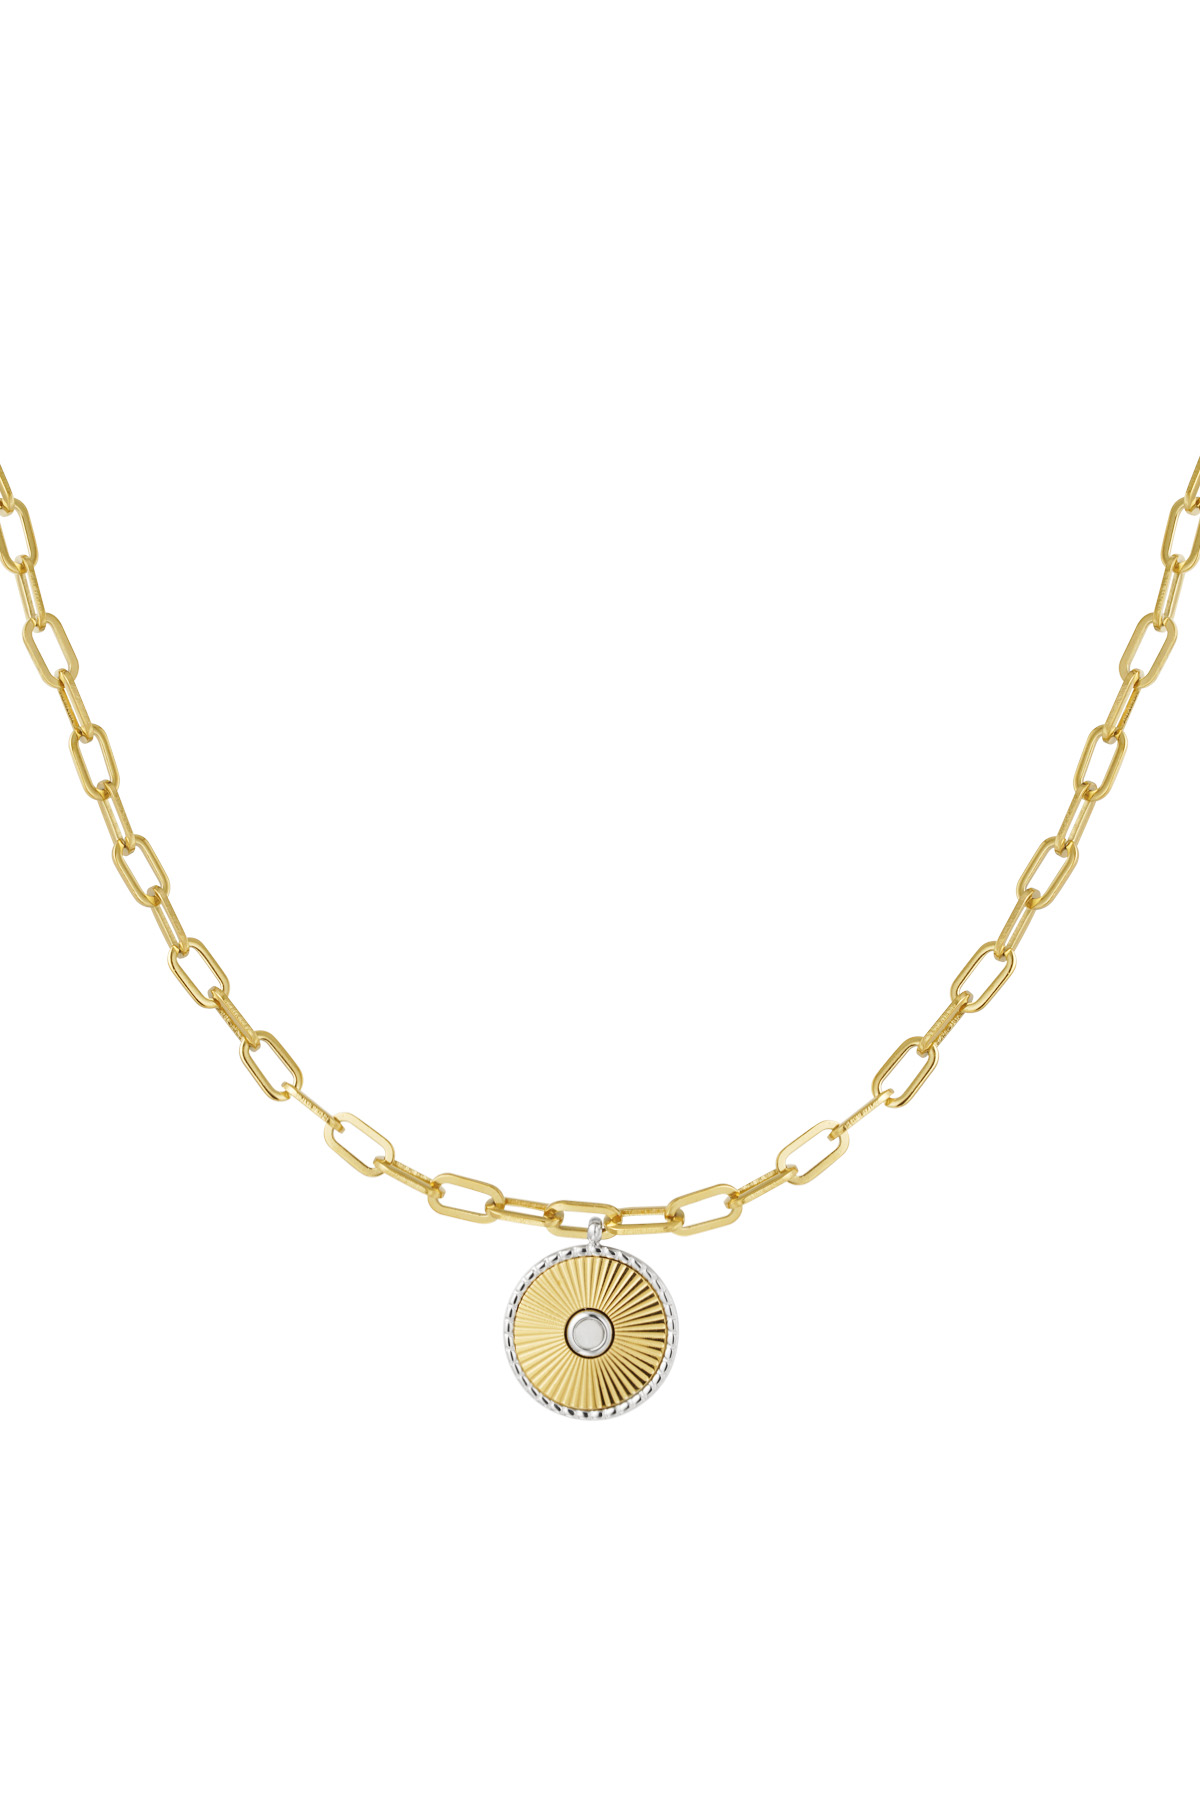 Link necklace with gold/silver detail - gold